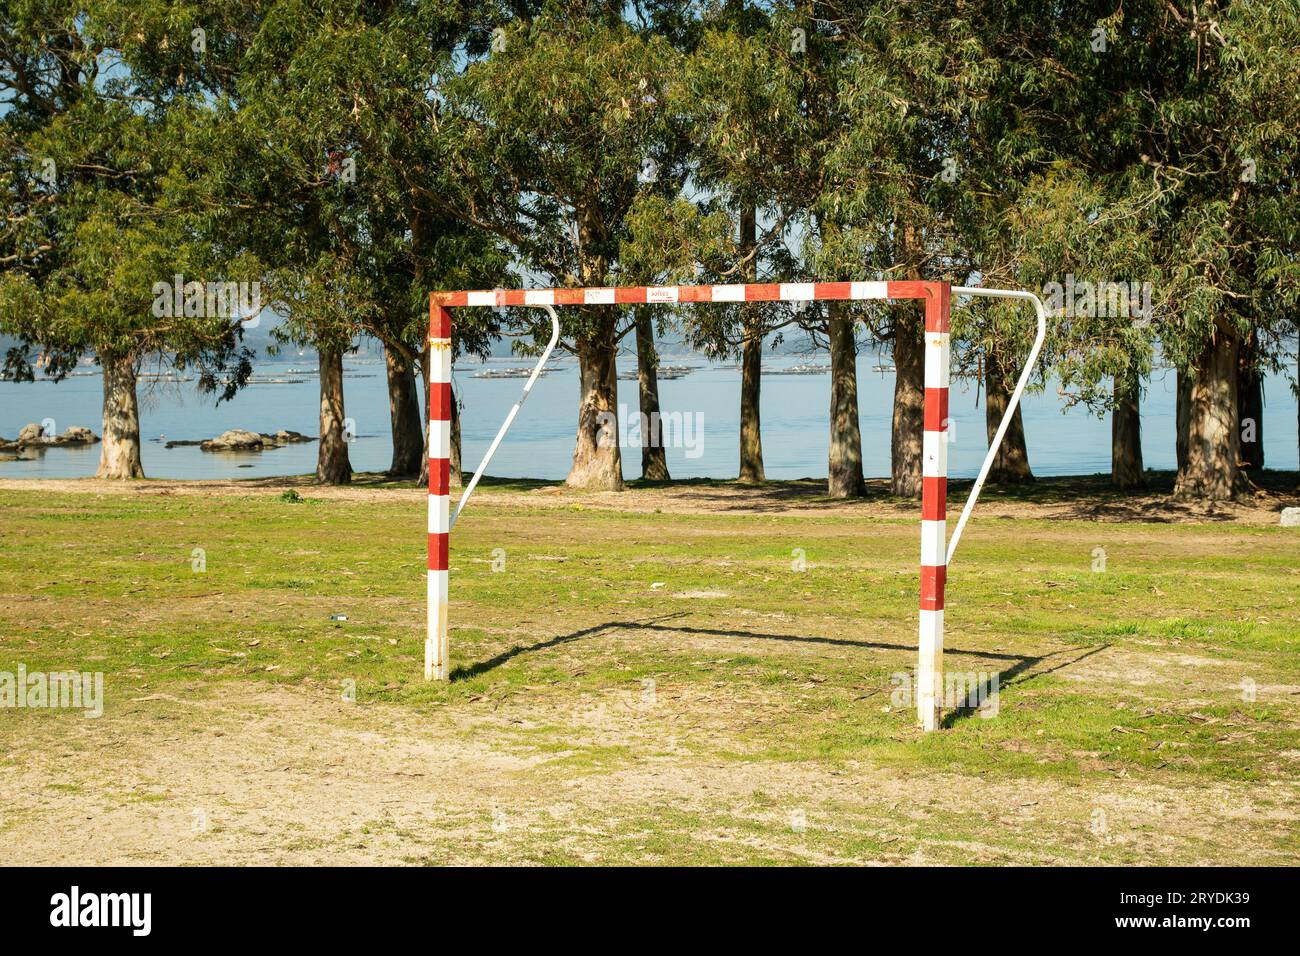 Soccer gate in amateur soccer court Stock Photo